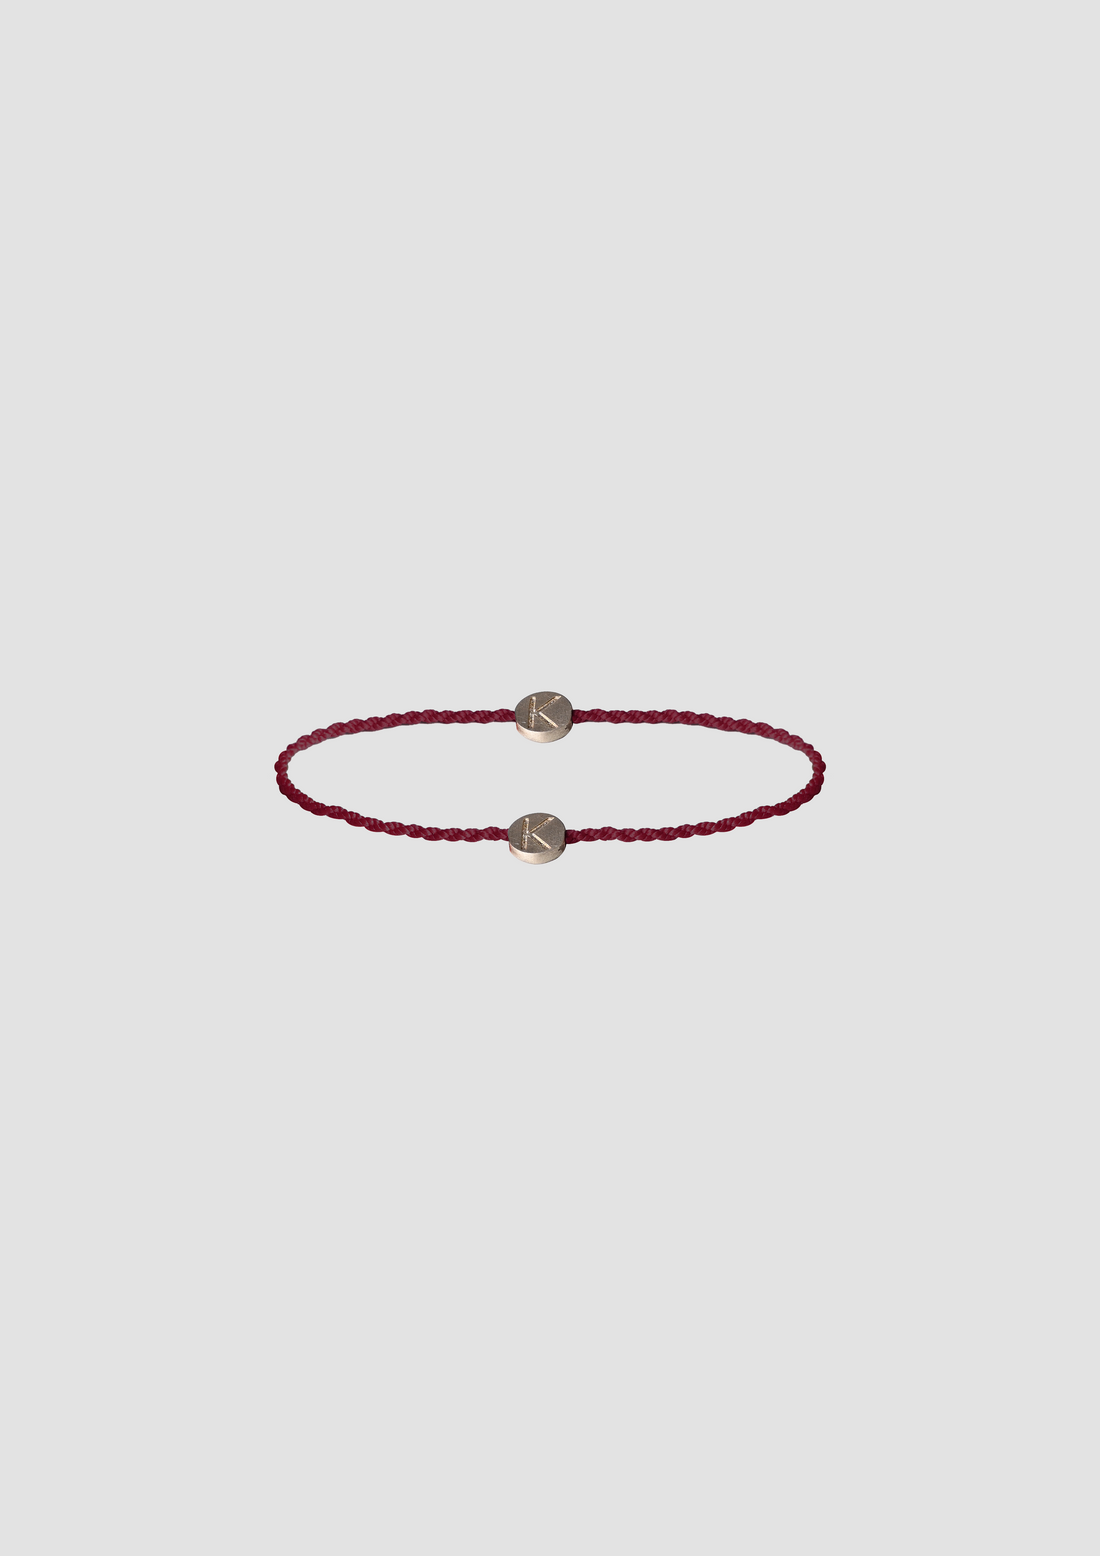 Moon Bracelet in Silver and Cord in Burgundy